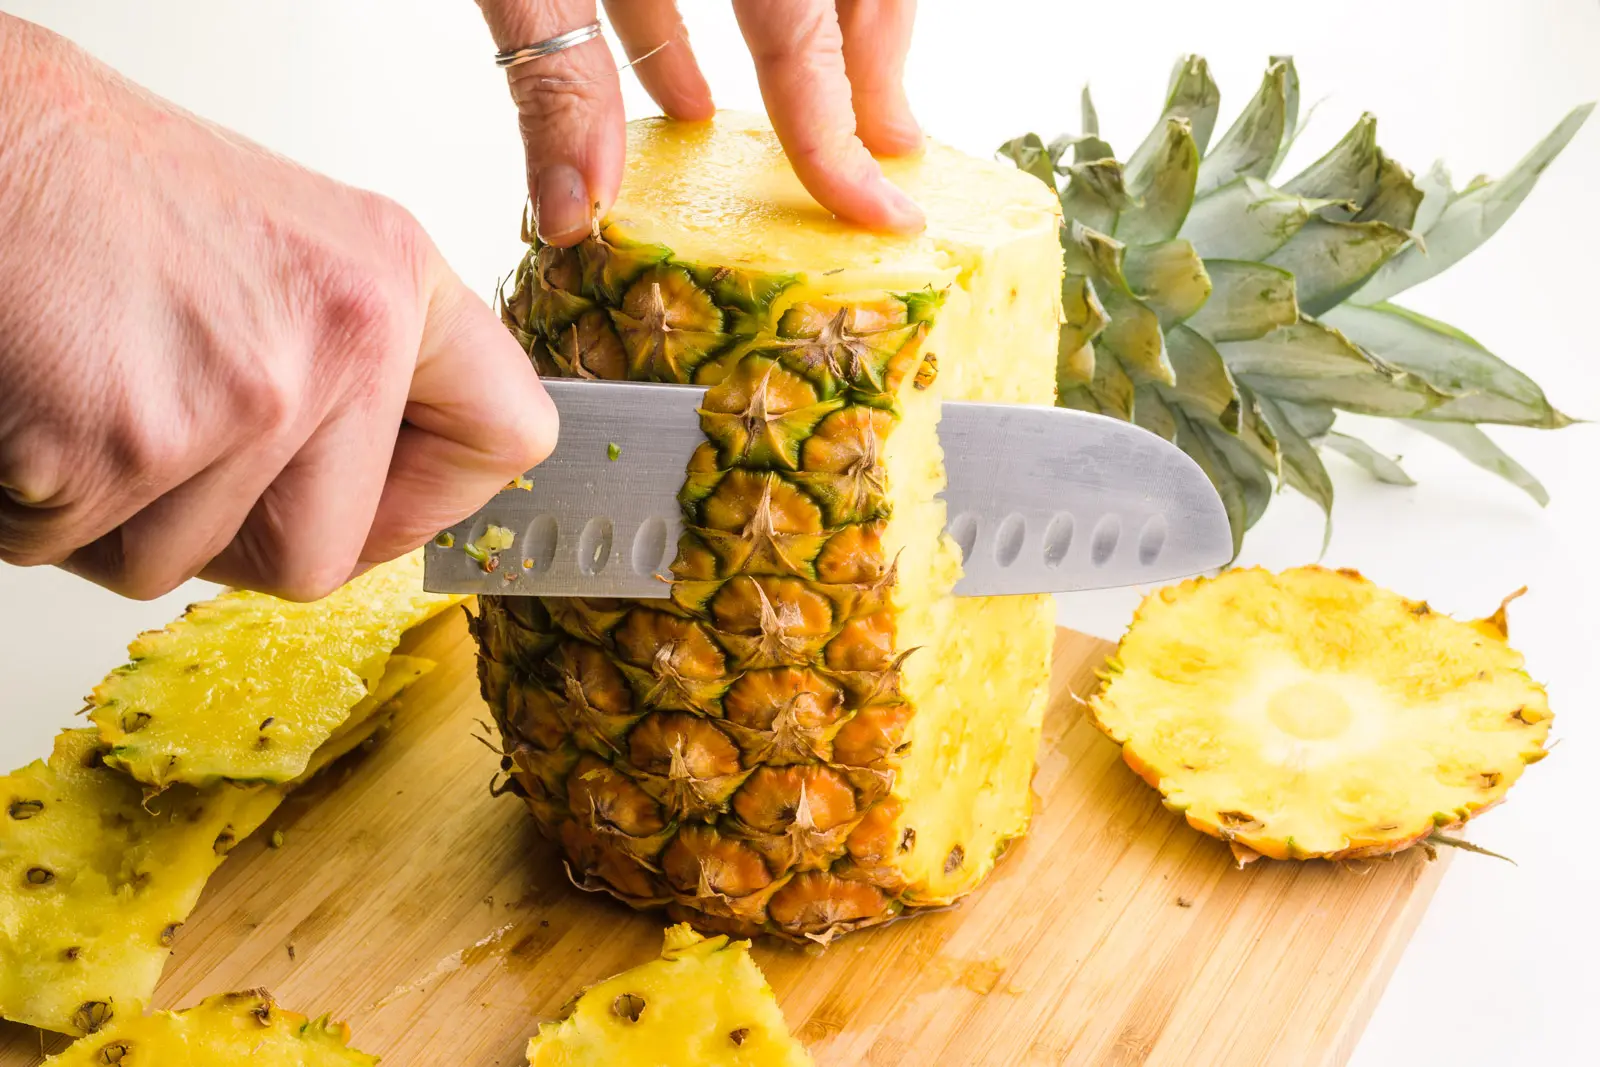 A hand holds a knife, cutting down the edge of a pineapple to remove the outer layer.